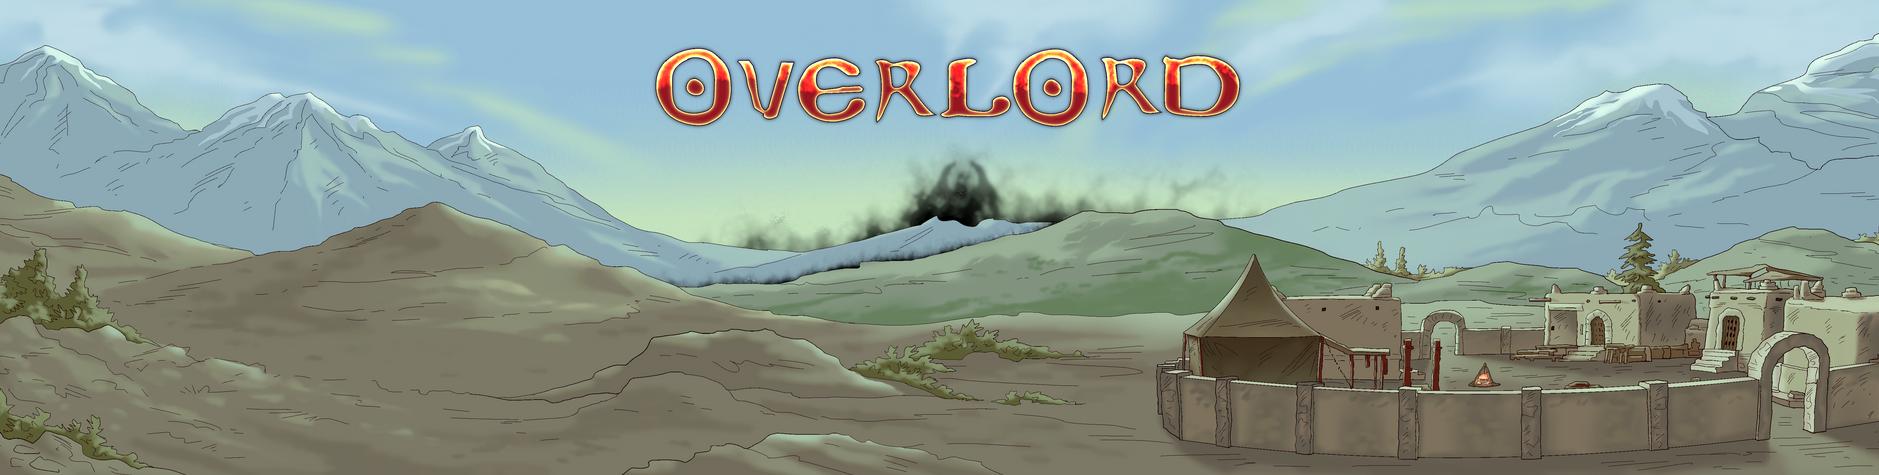 Project63 - Overlord Version 0.15